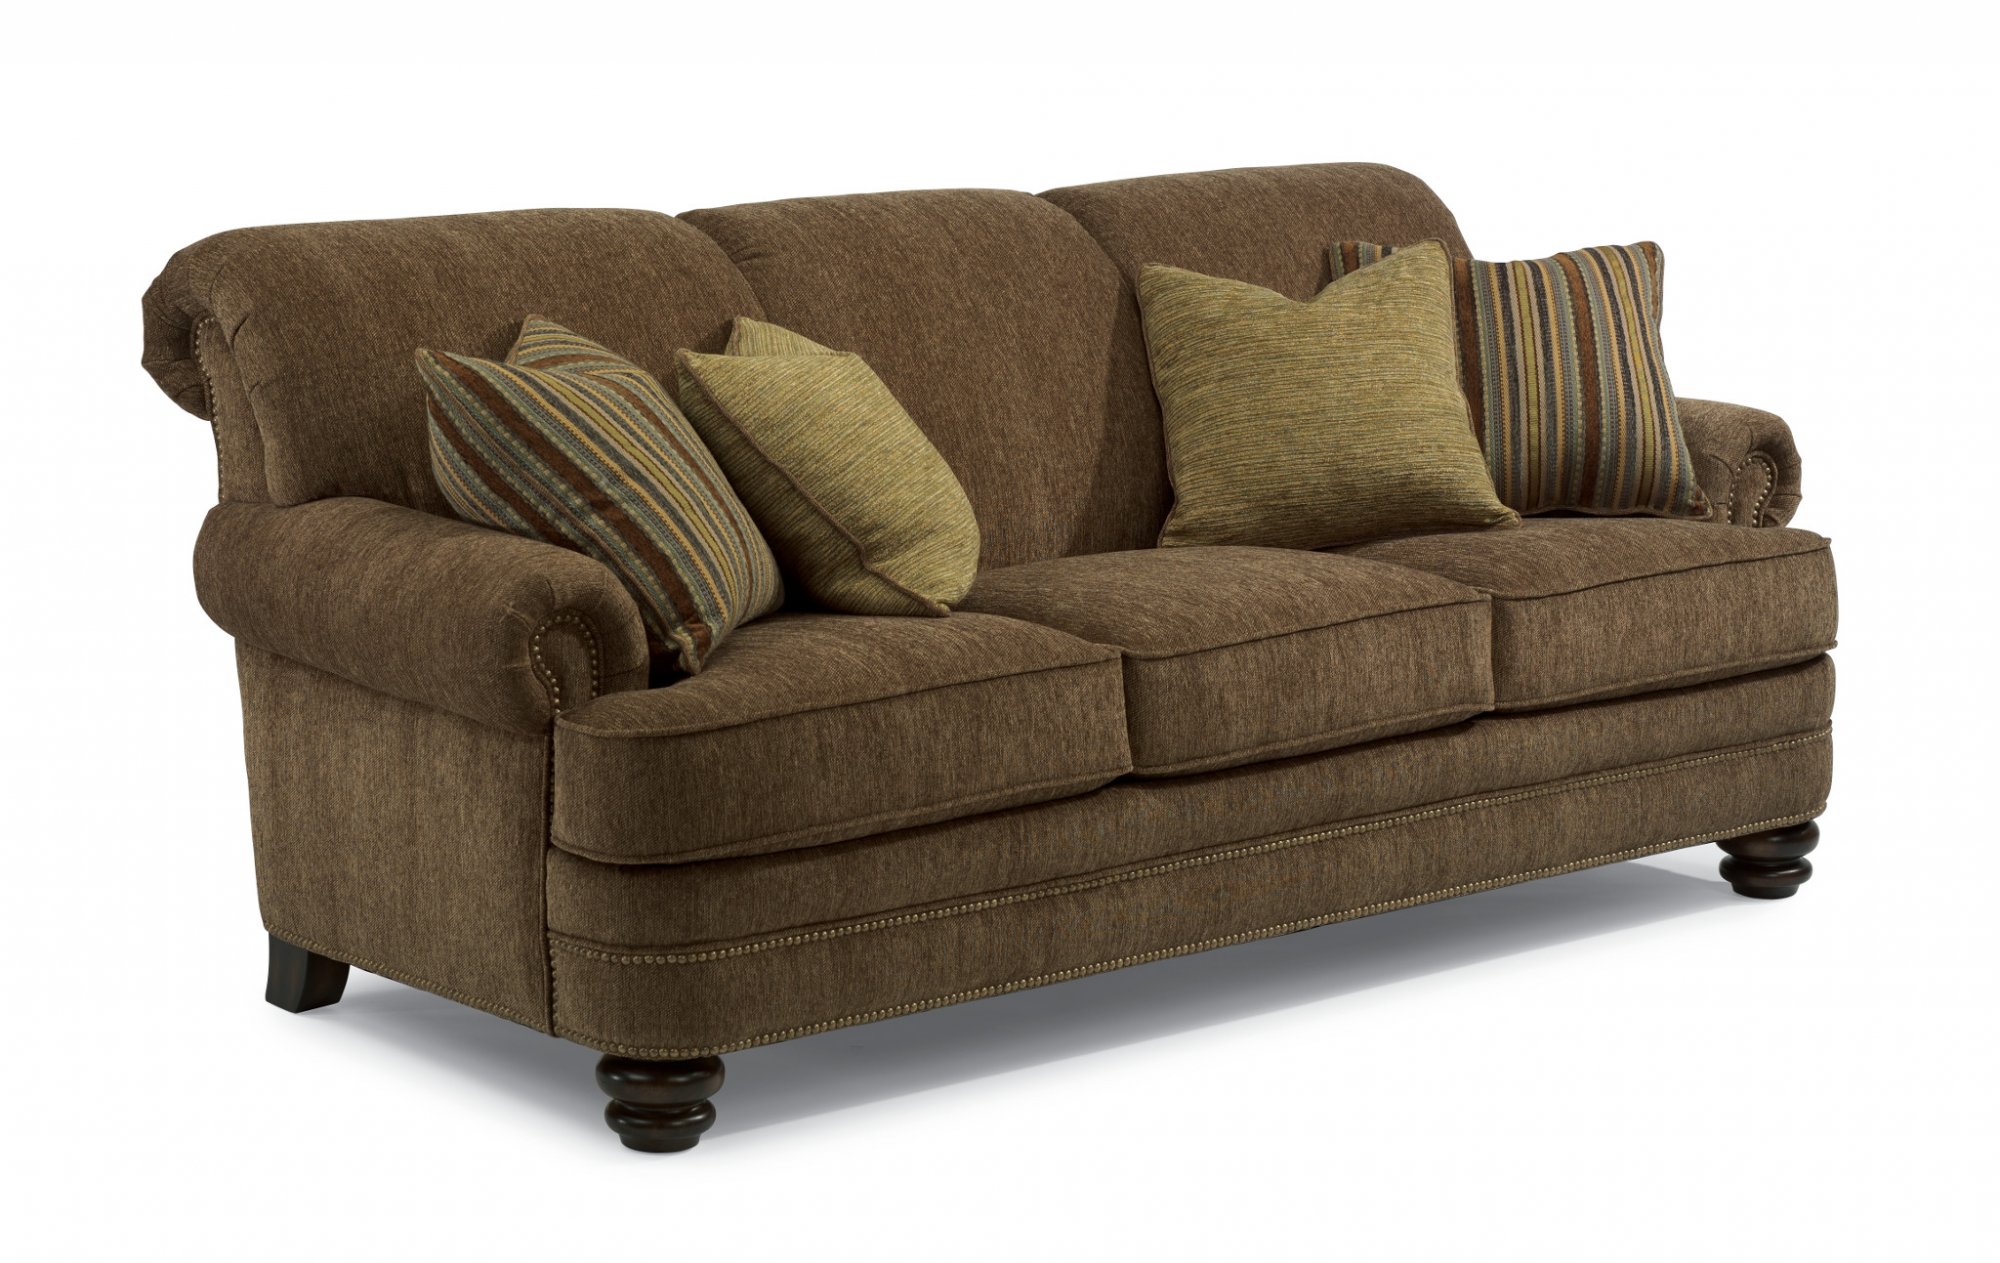 flexsteel sofas share via email download a high-resolution image HGUQDMD